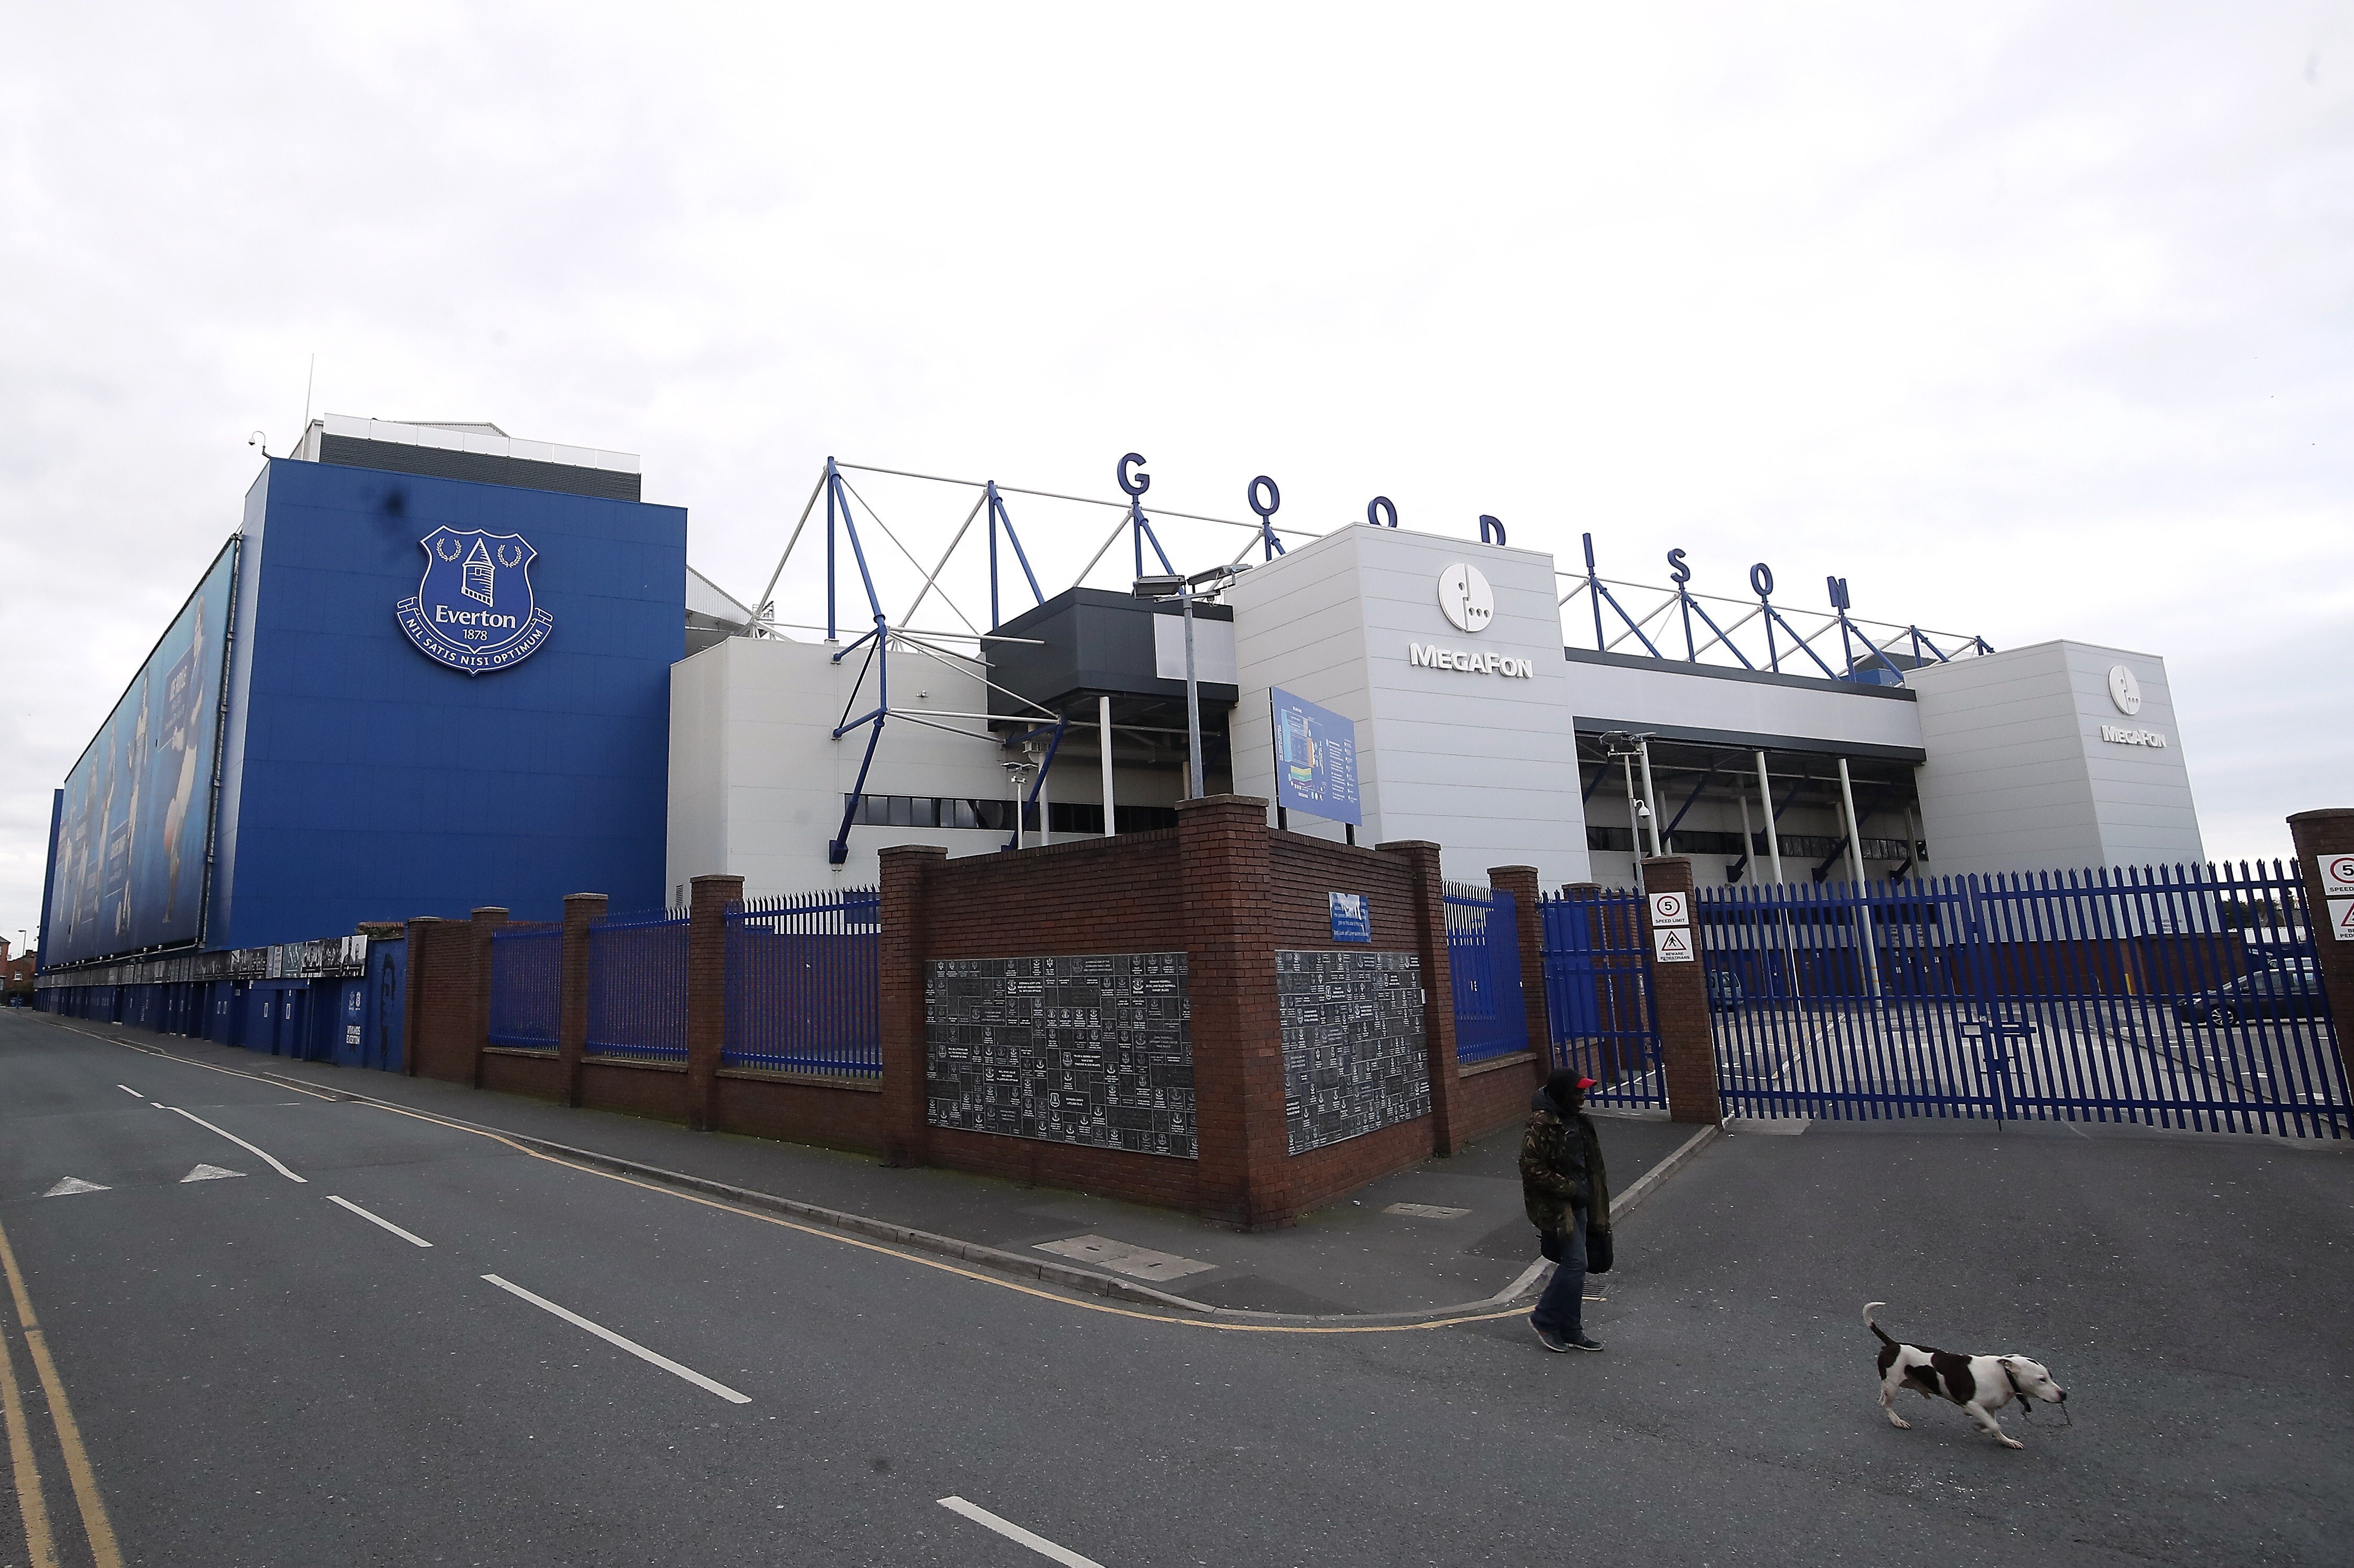 There will be no supporters at Goodison Park for Sunday’s Merseyside Derby, but Everton will be playing for pride against Liverpool. Photo: Martin Rickett/PA Images via Getty Images